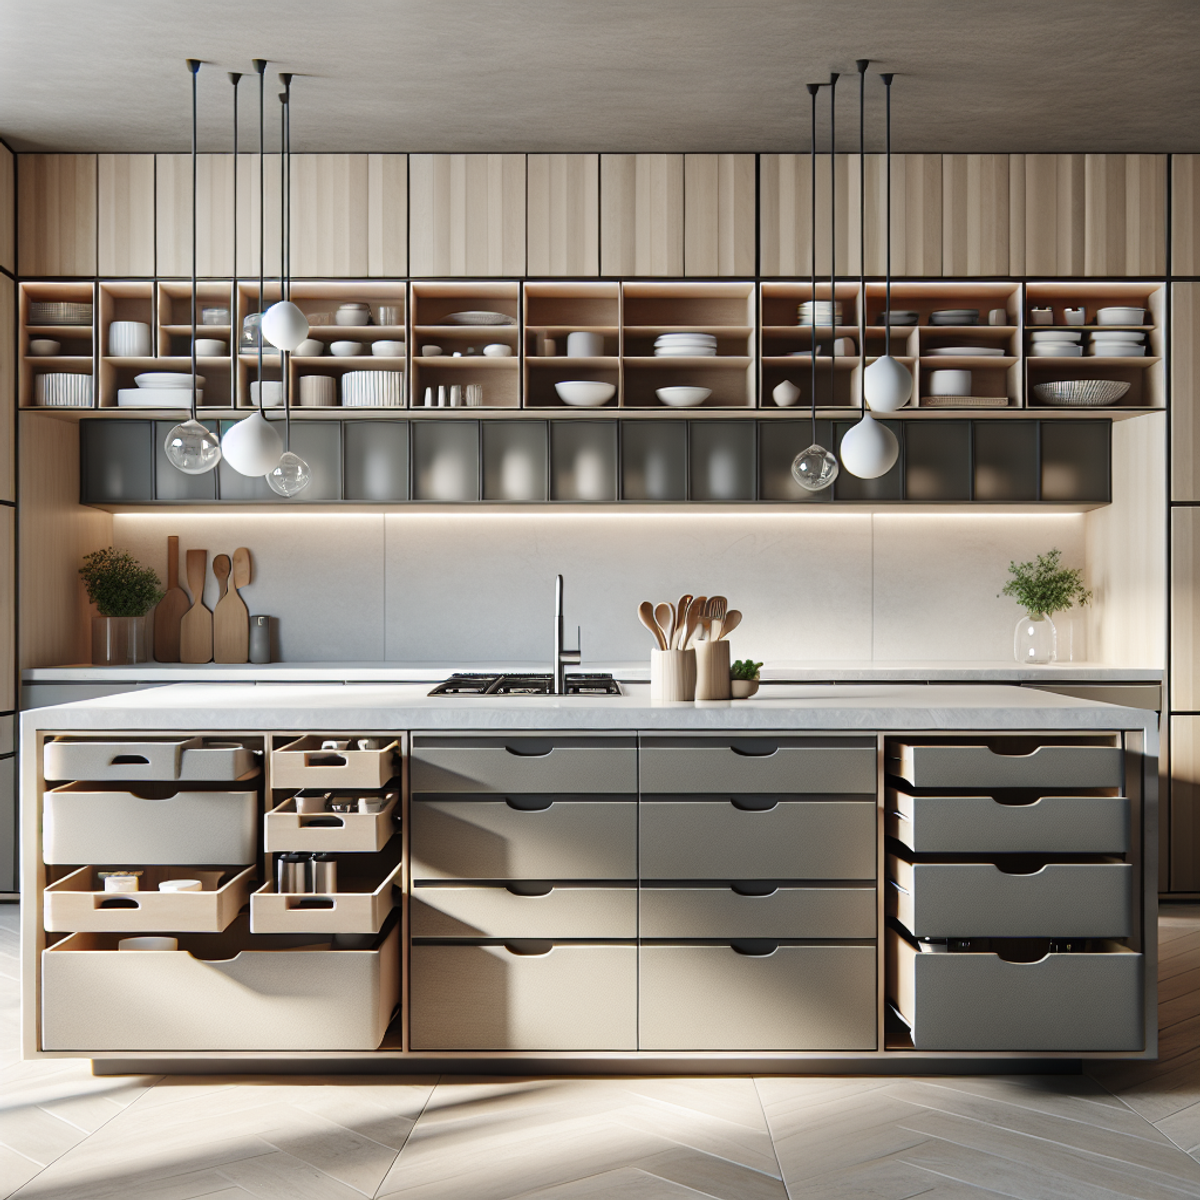 A modern kitchen island with built-in storage solutions, multi-level surfaces, and sleek lines in neutral colors.